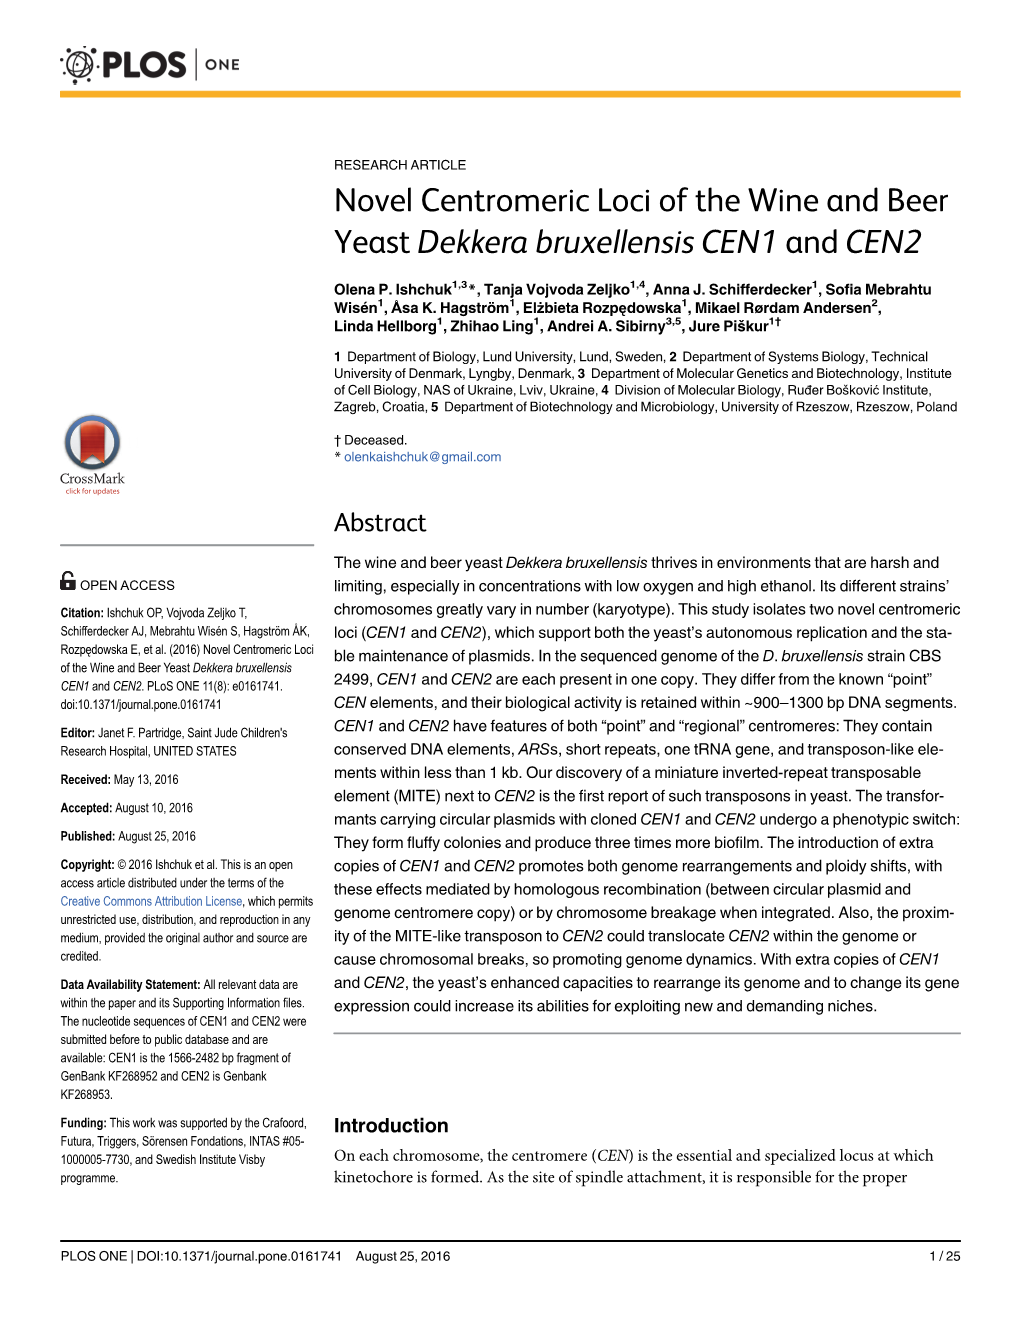 Novel Centromeric Loci of the Wine and Beer Yeast Dekkera Bruxellensis CEN1 and CEN2